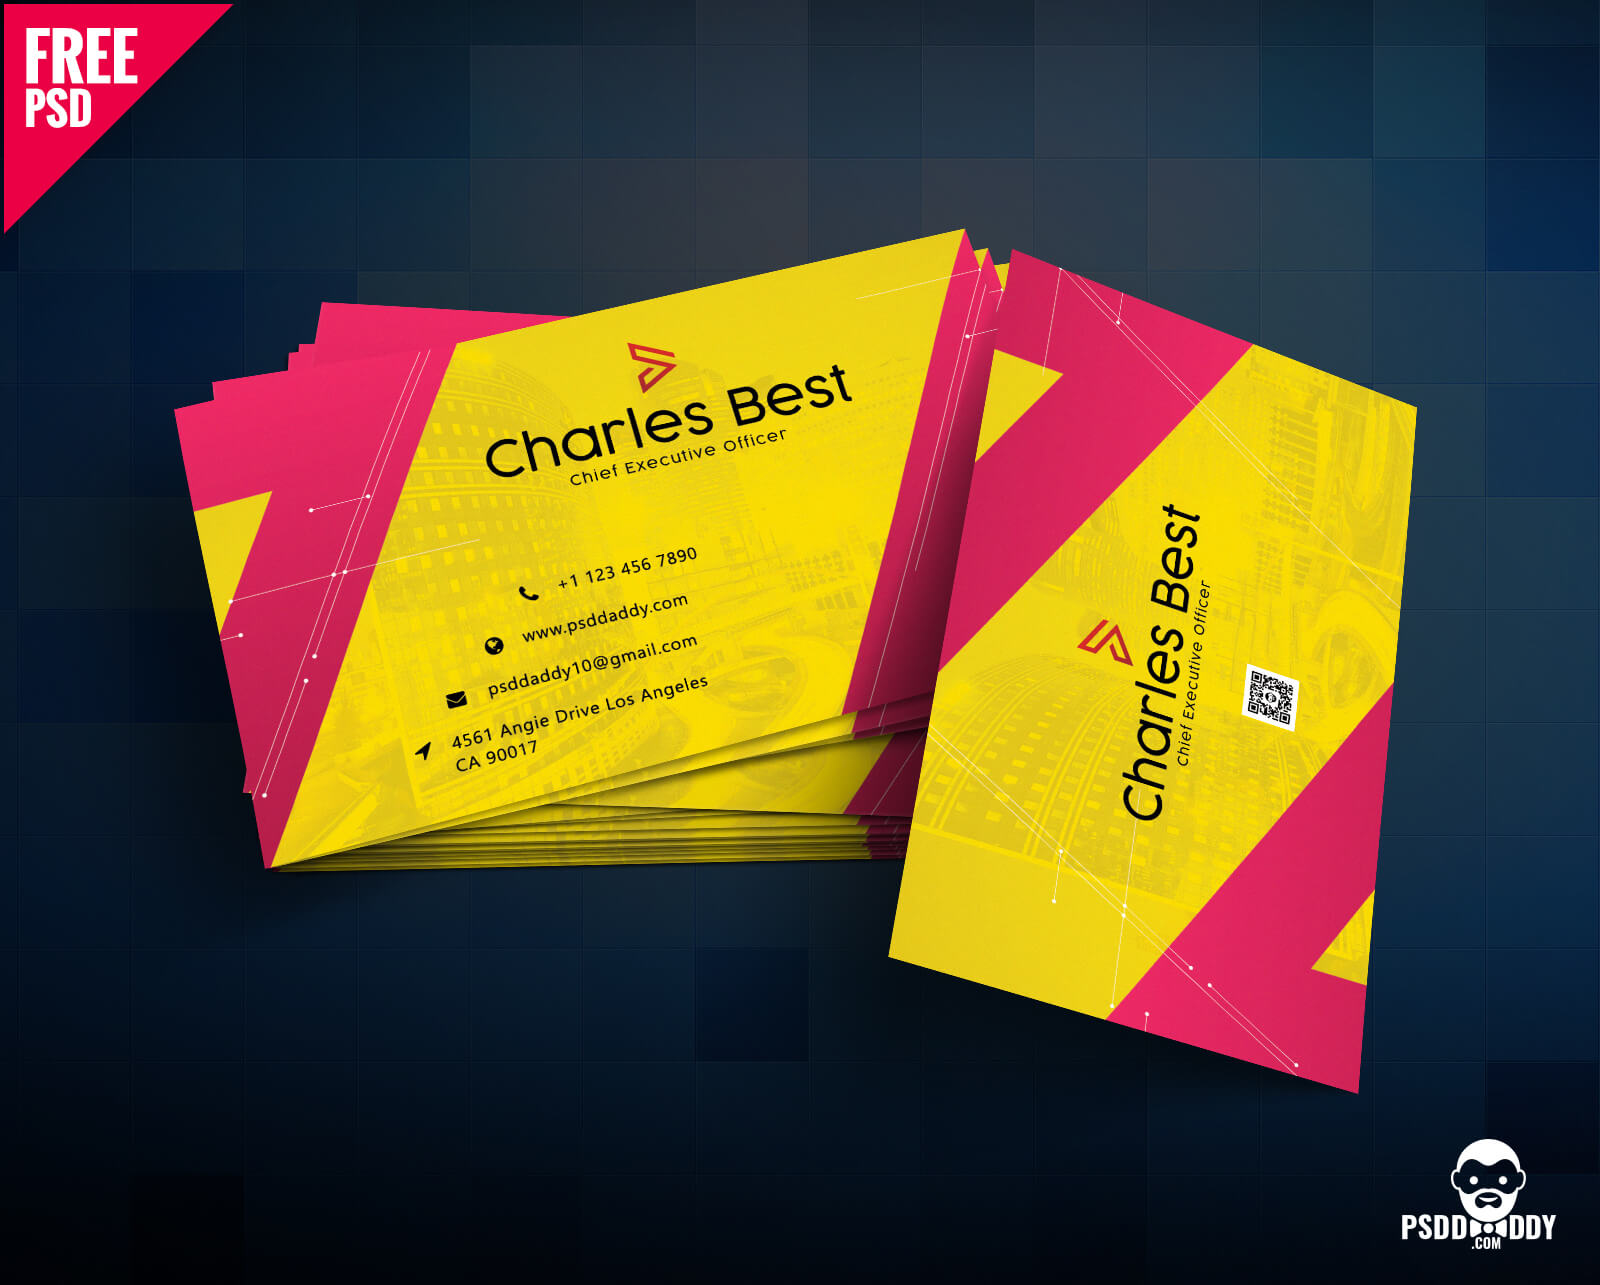 Download] Creative Business Card Free Psd | Psddaddy With Business Card Size Template Photoshop